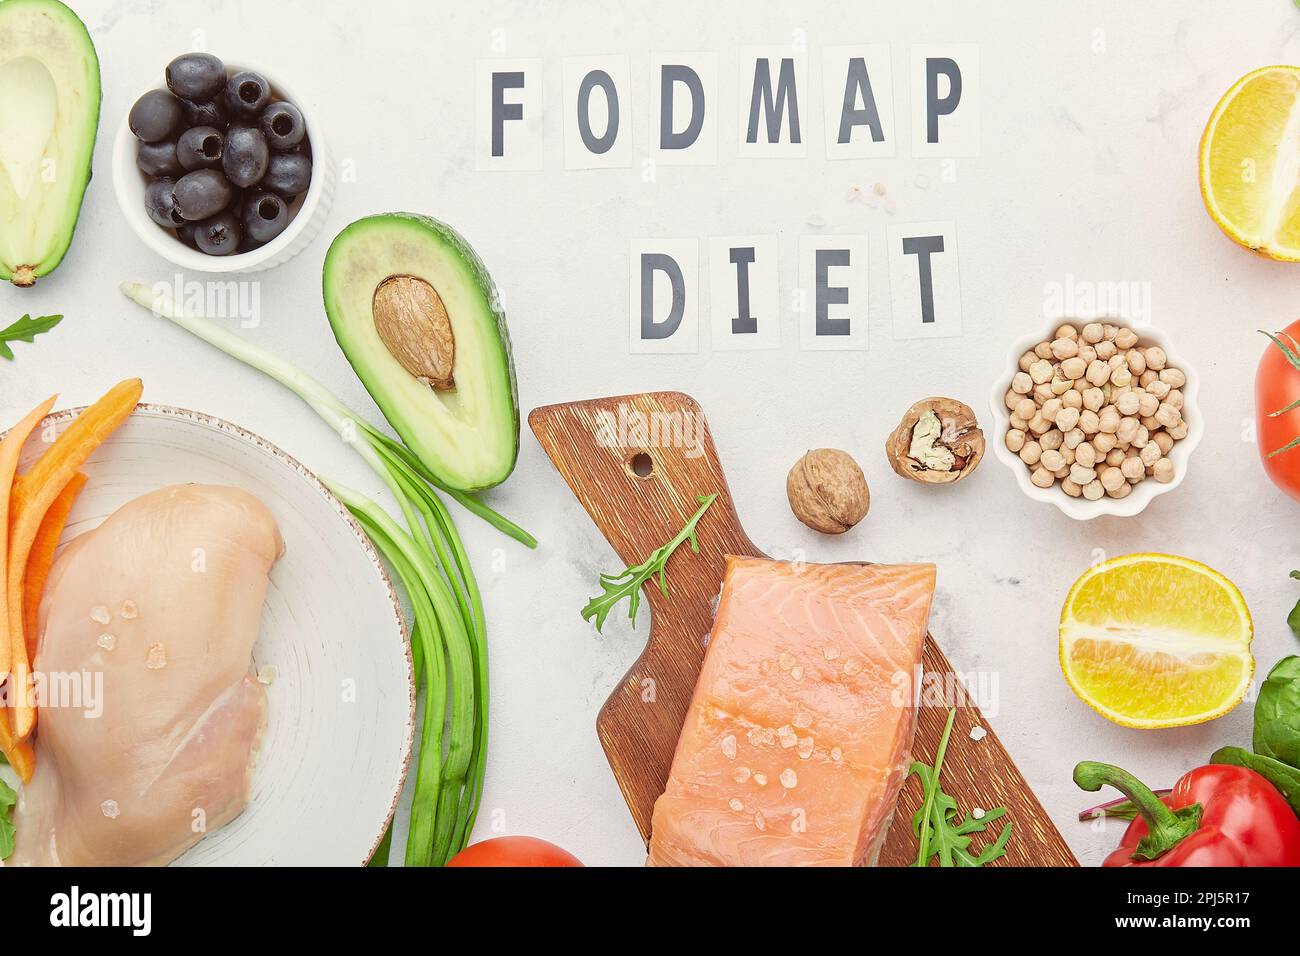 Low fodmap ingredients diet - seafish, vegetables and fruits, nuts, greens, beans. Fodmap diet concept with text in center. Flat lay. Stock Photo